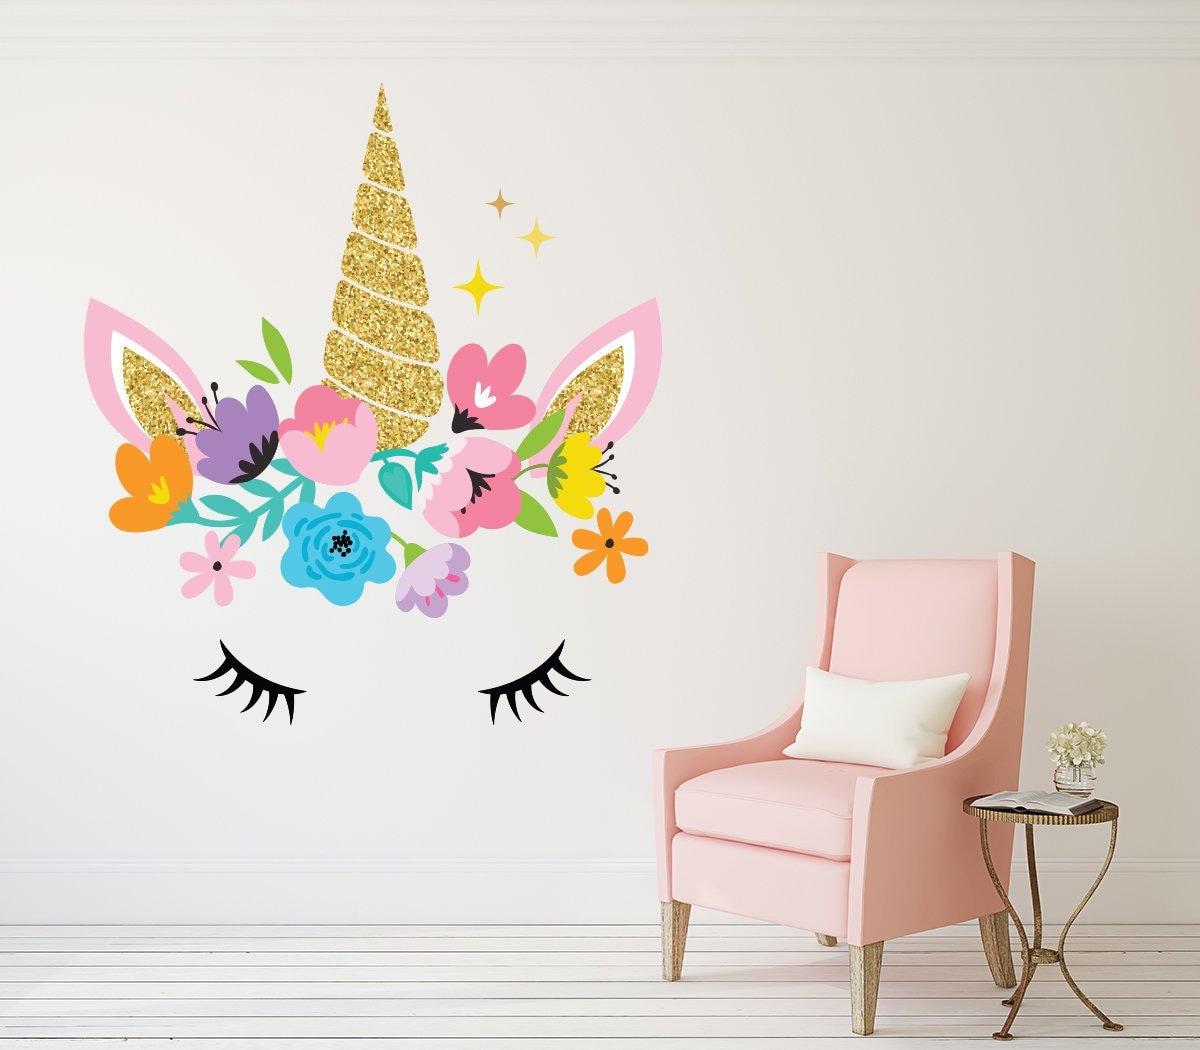 Unicorn Wall Decals Bedroom Wall Decor Girls Wall Decals Unicorn Peel and Stick Removable Wall Decals Watercolour 